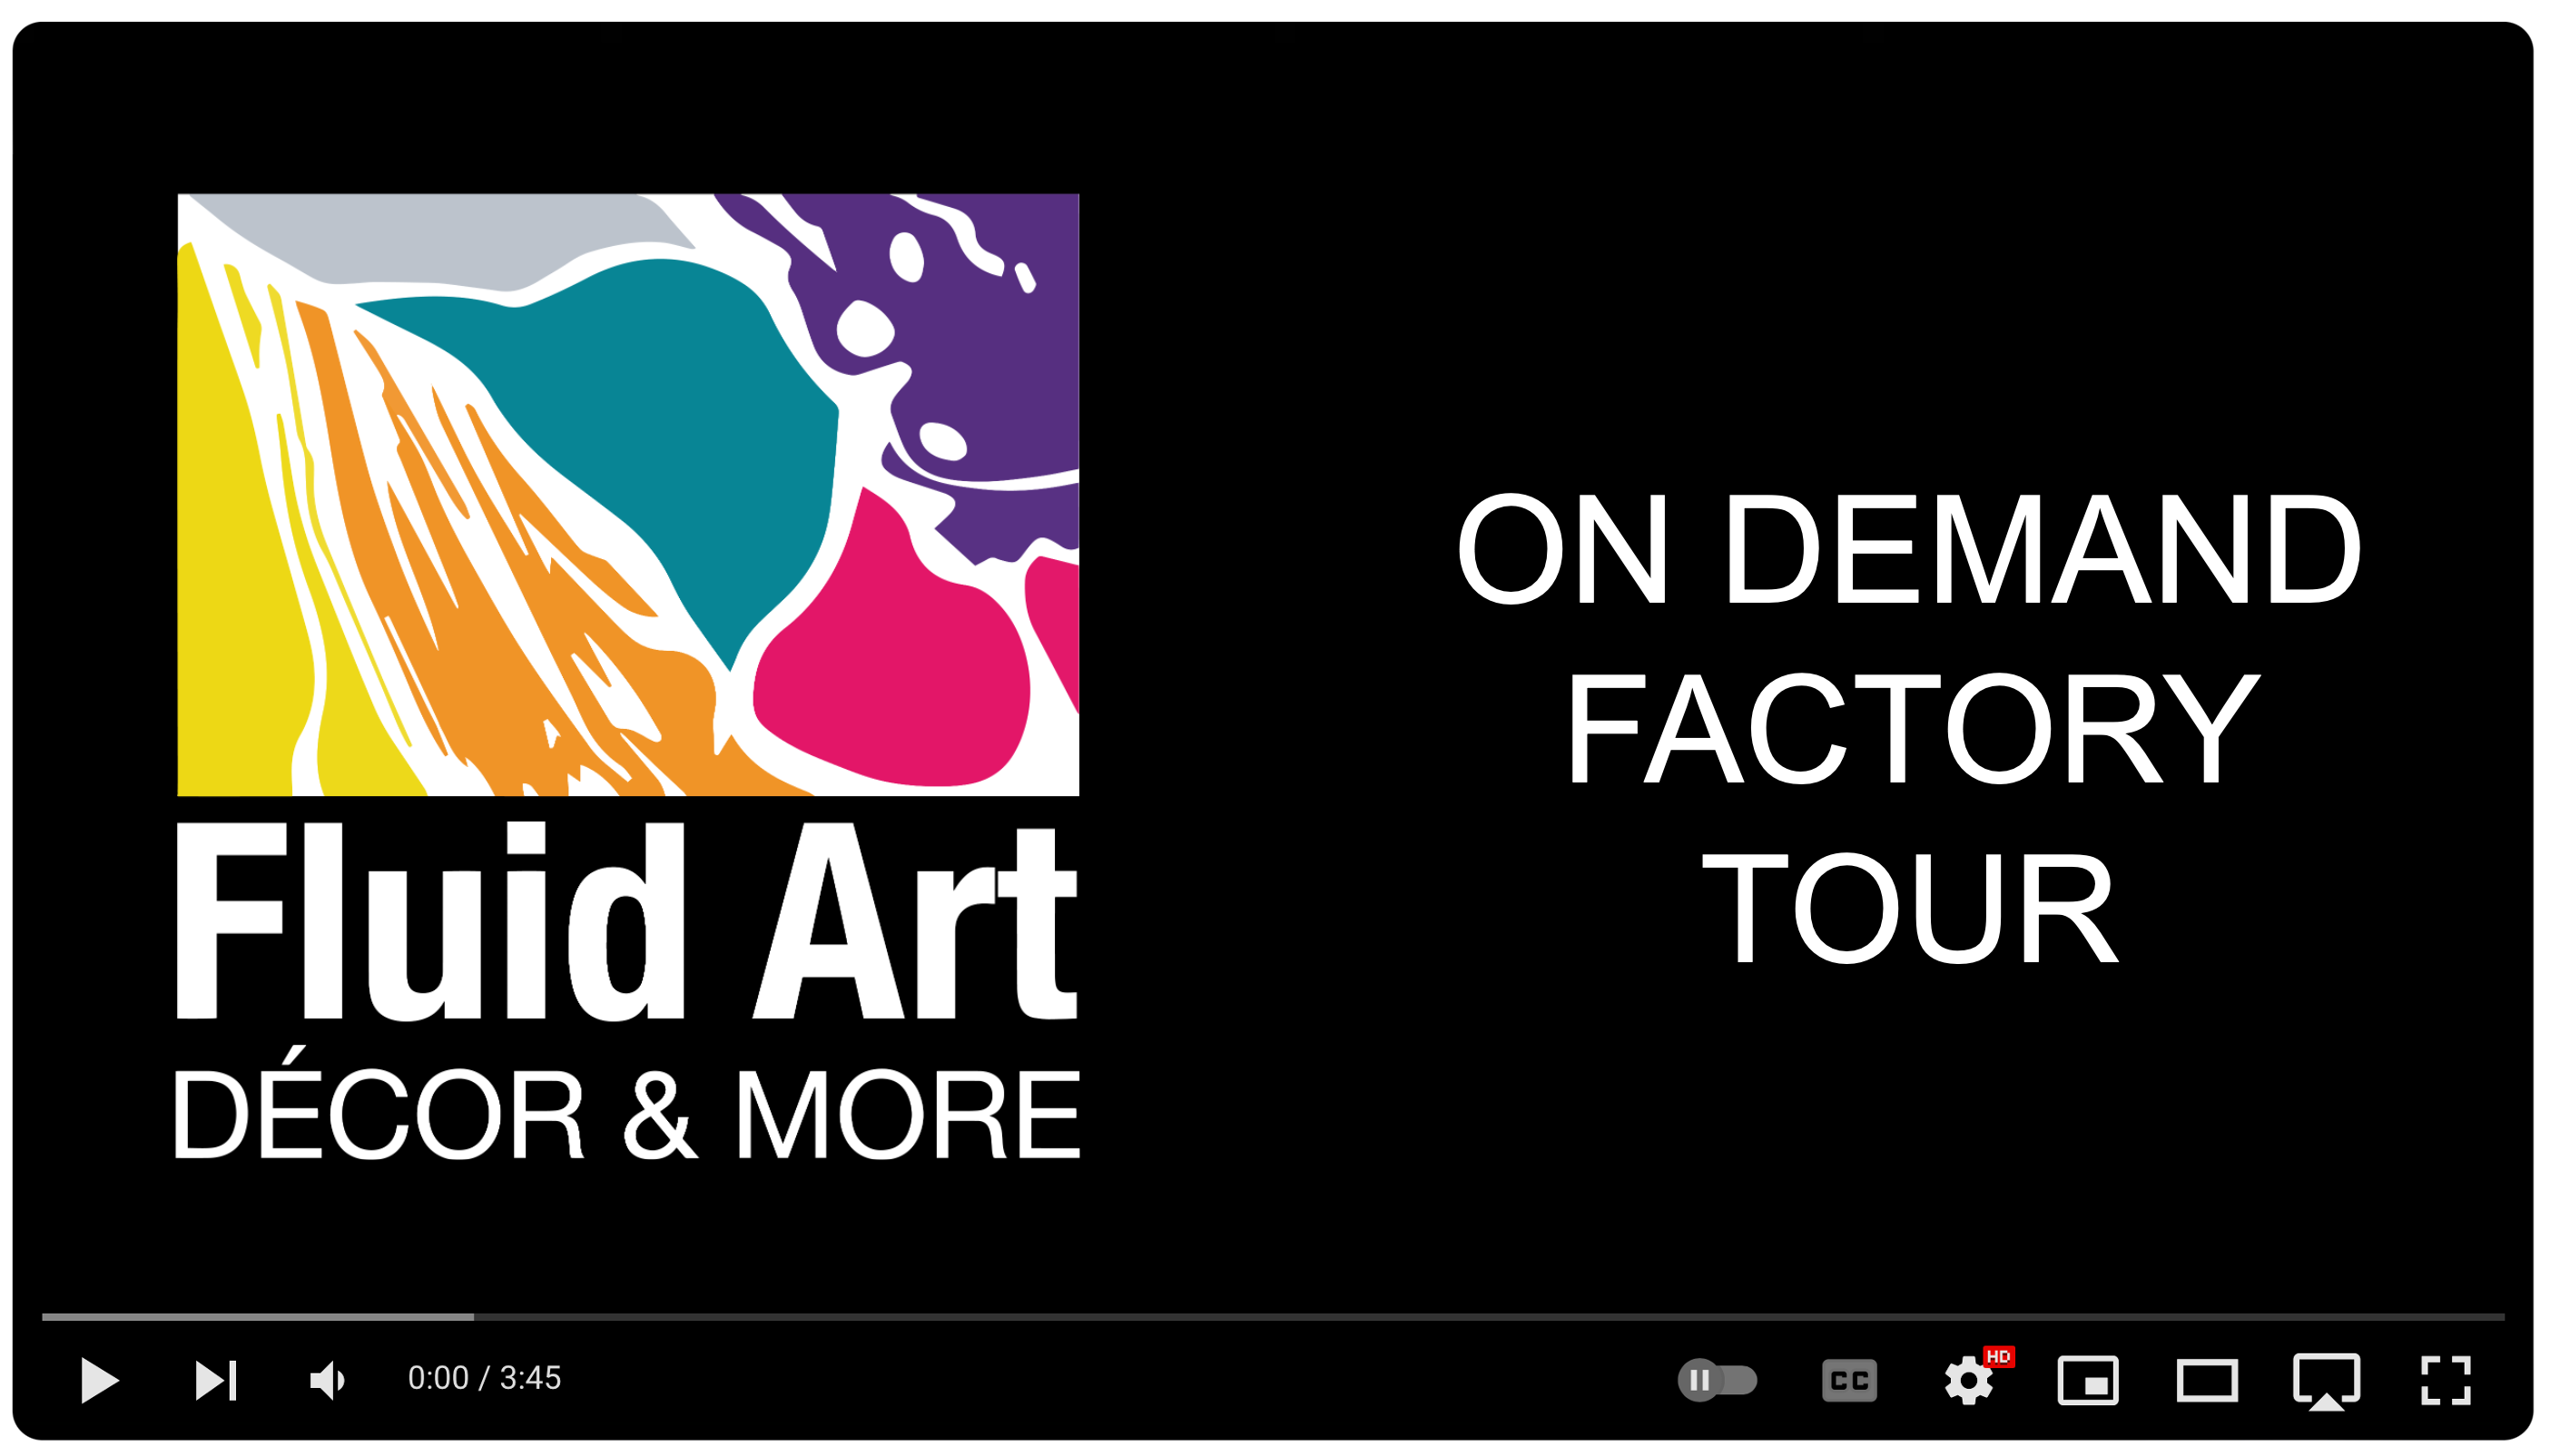 Load video: Tour of the Fluid Art Decor factory with explanation of printing techniques.